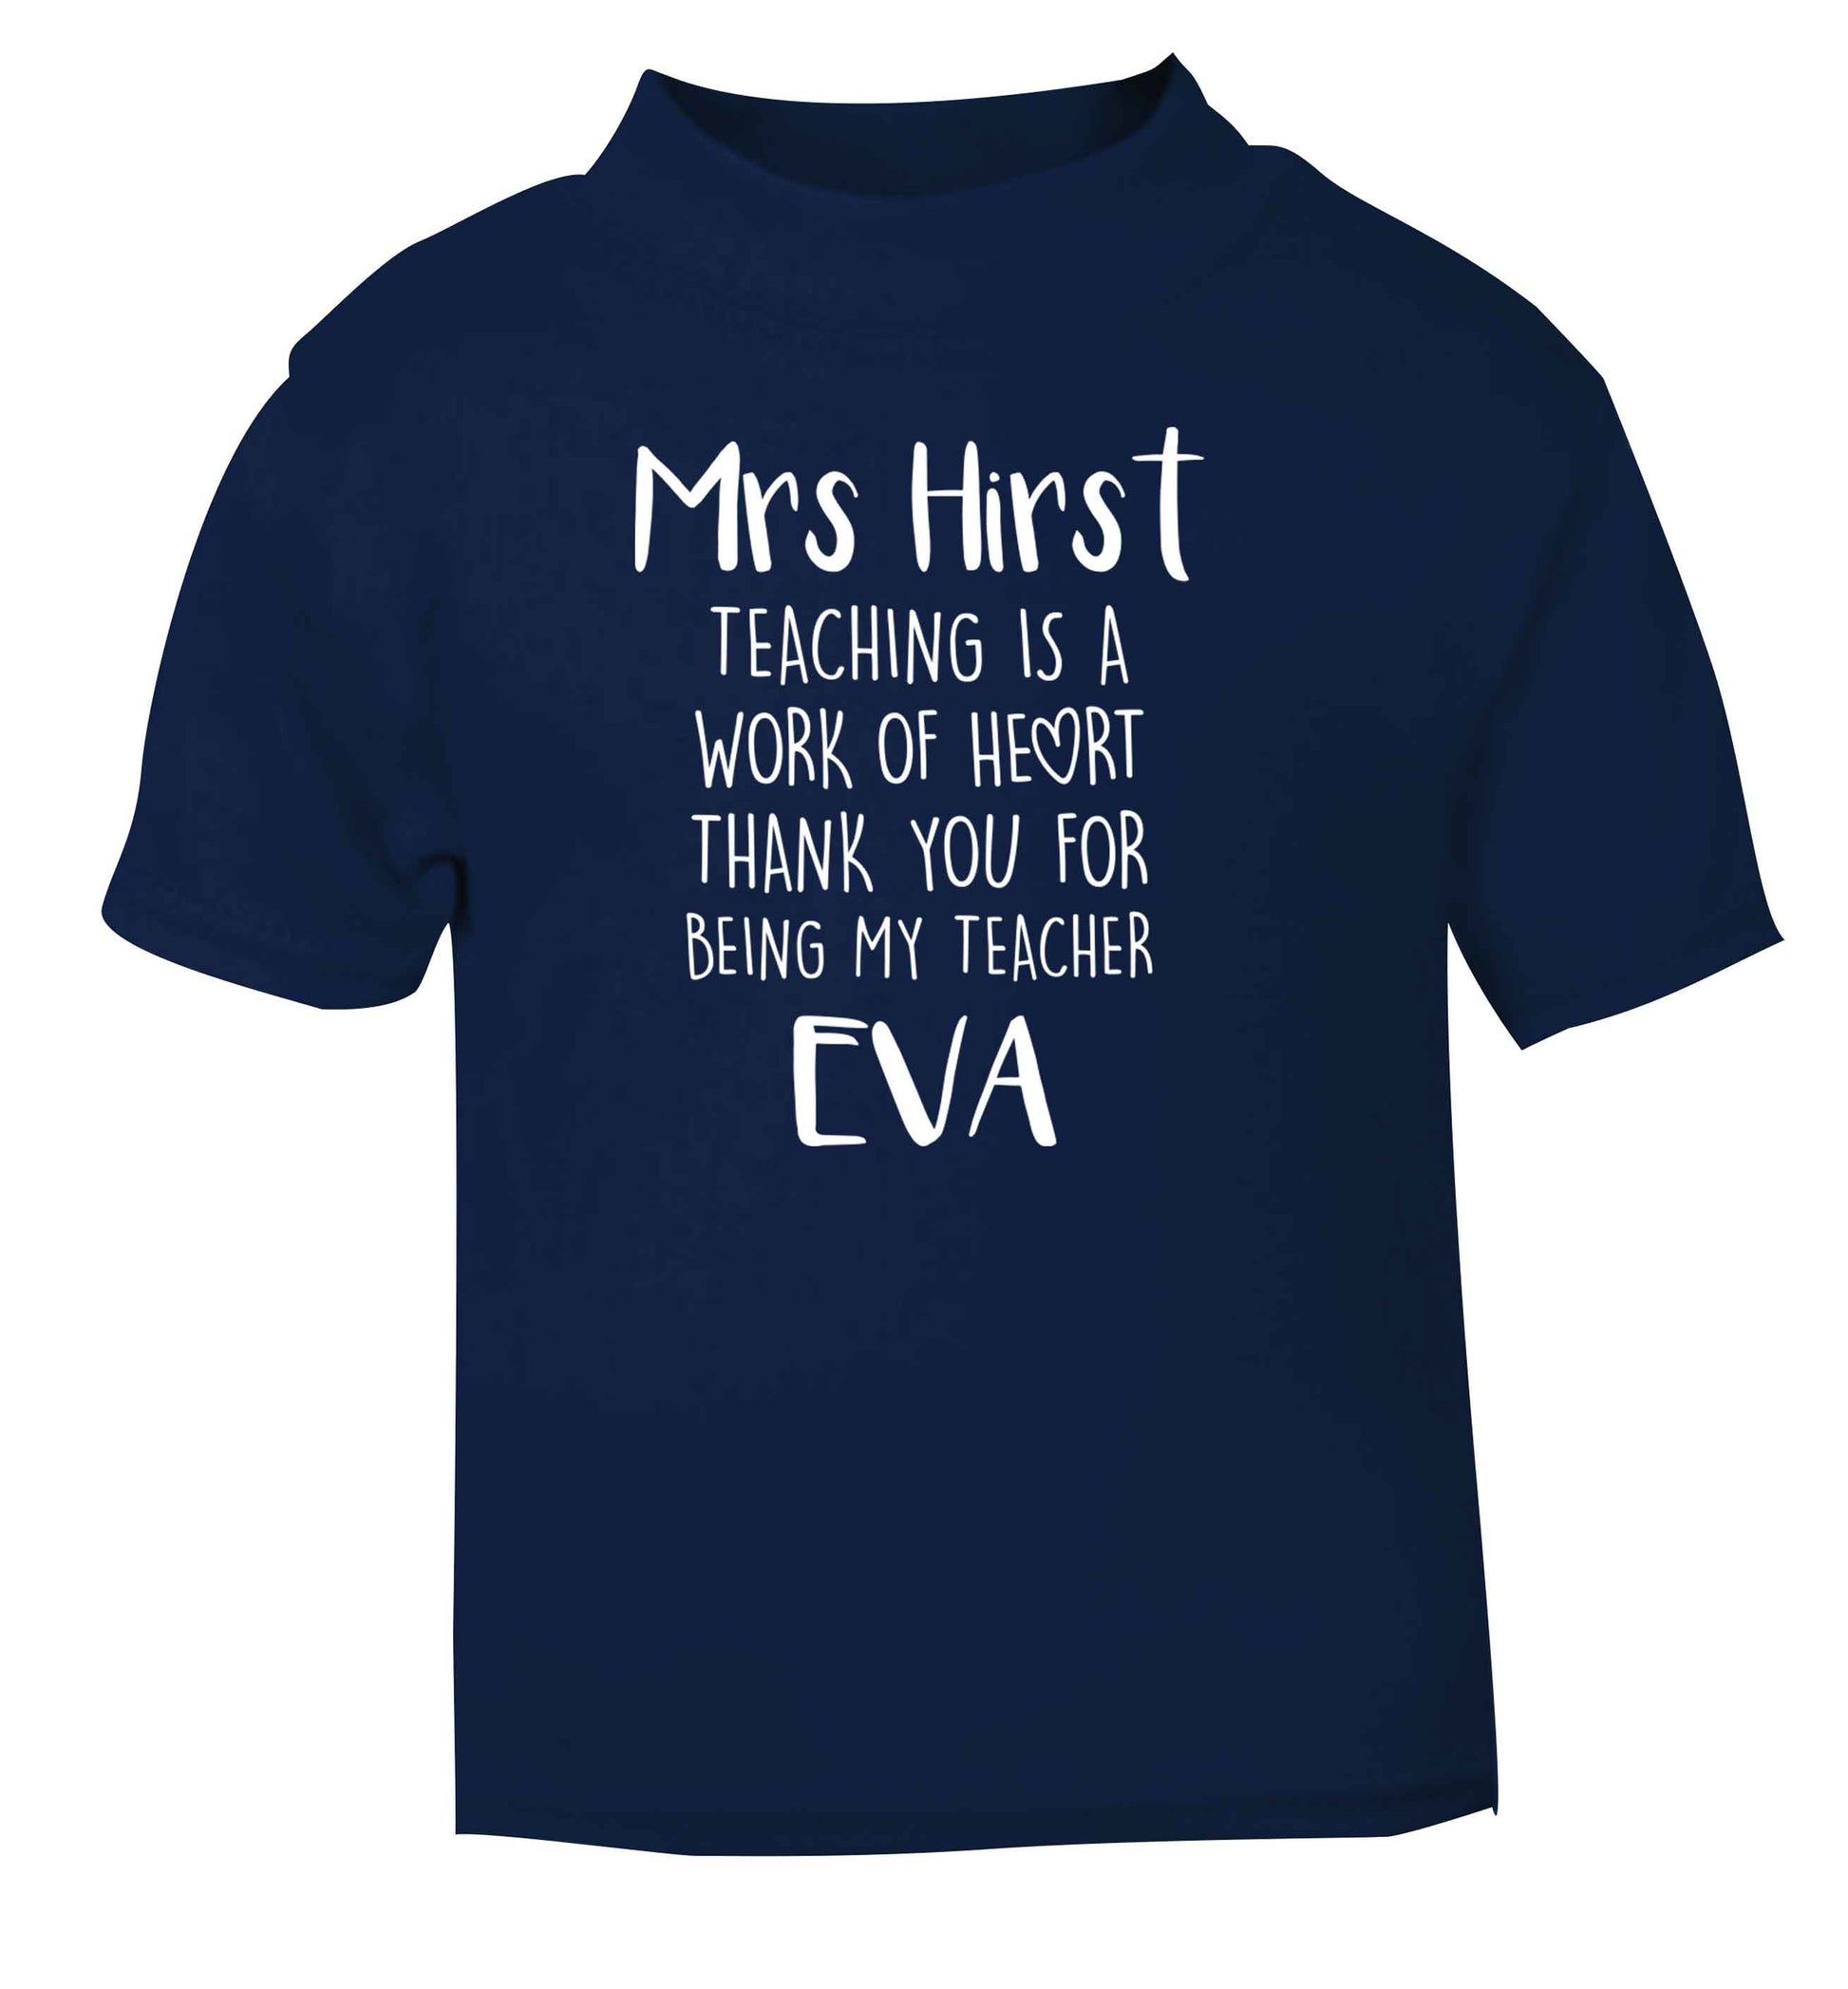 Personalised teaching is a work of heart thank you for being my teacher navy Baby Toddler Tshirt 2 Years